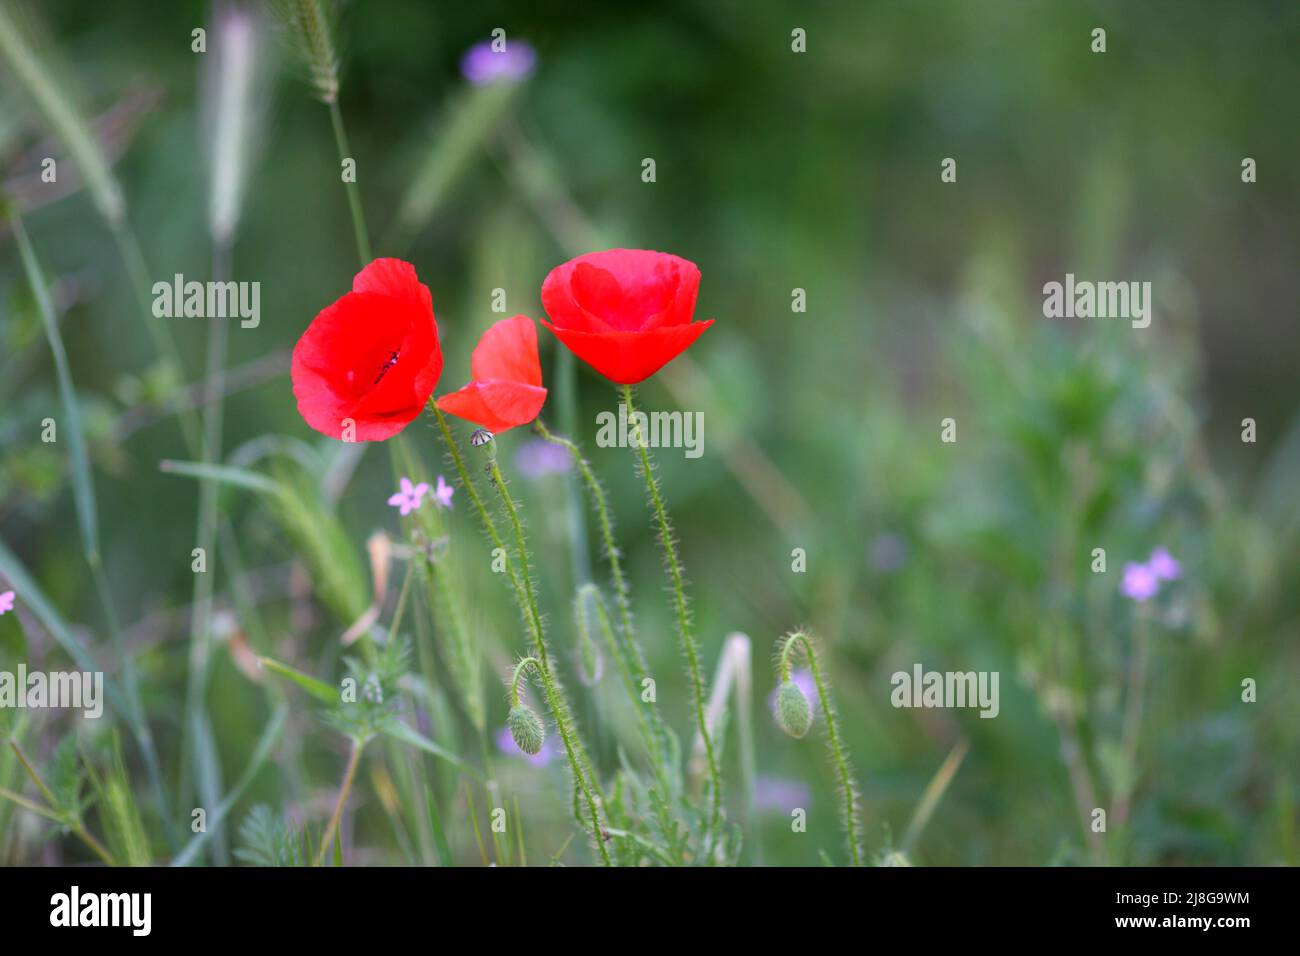 Red-flowered corn poppy, papaver rhoeas, growing in a garden in Szigethalom, Hungary Stock Photo